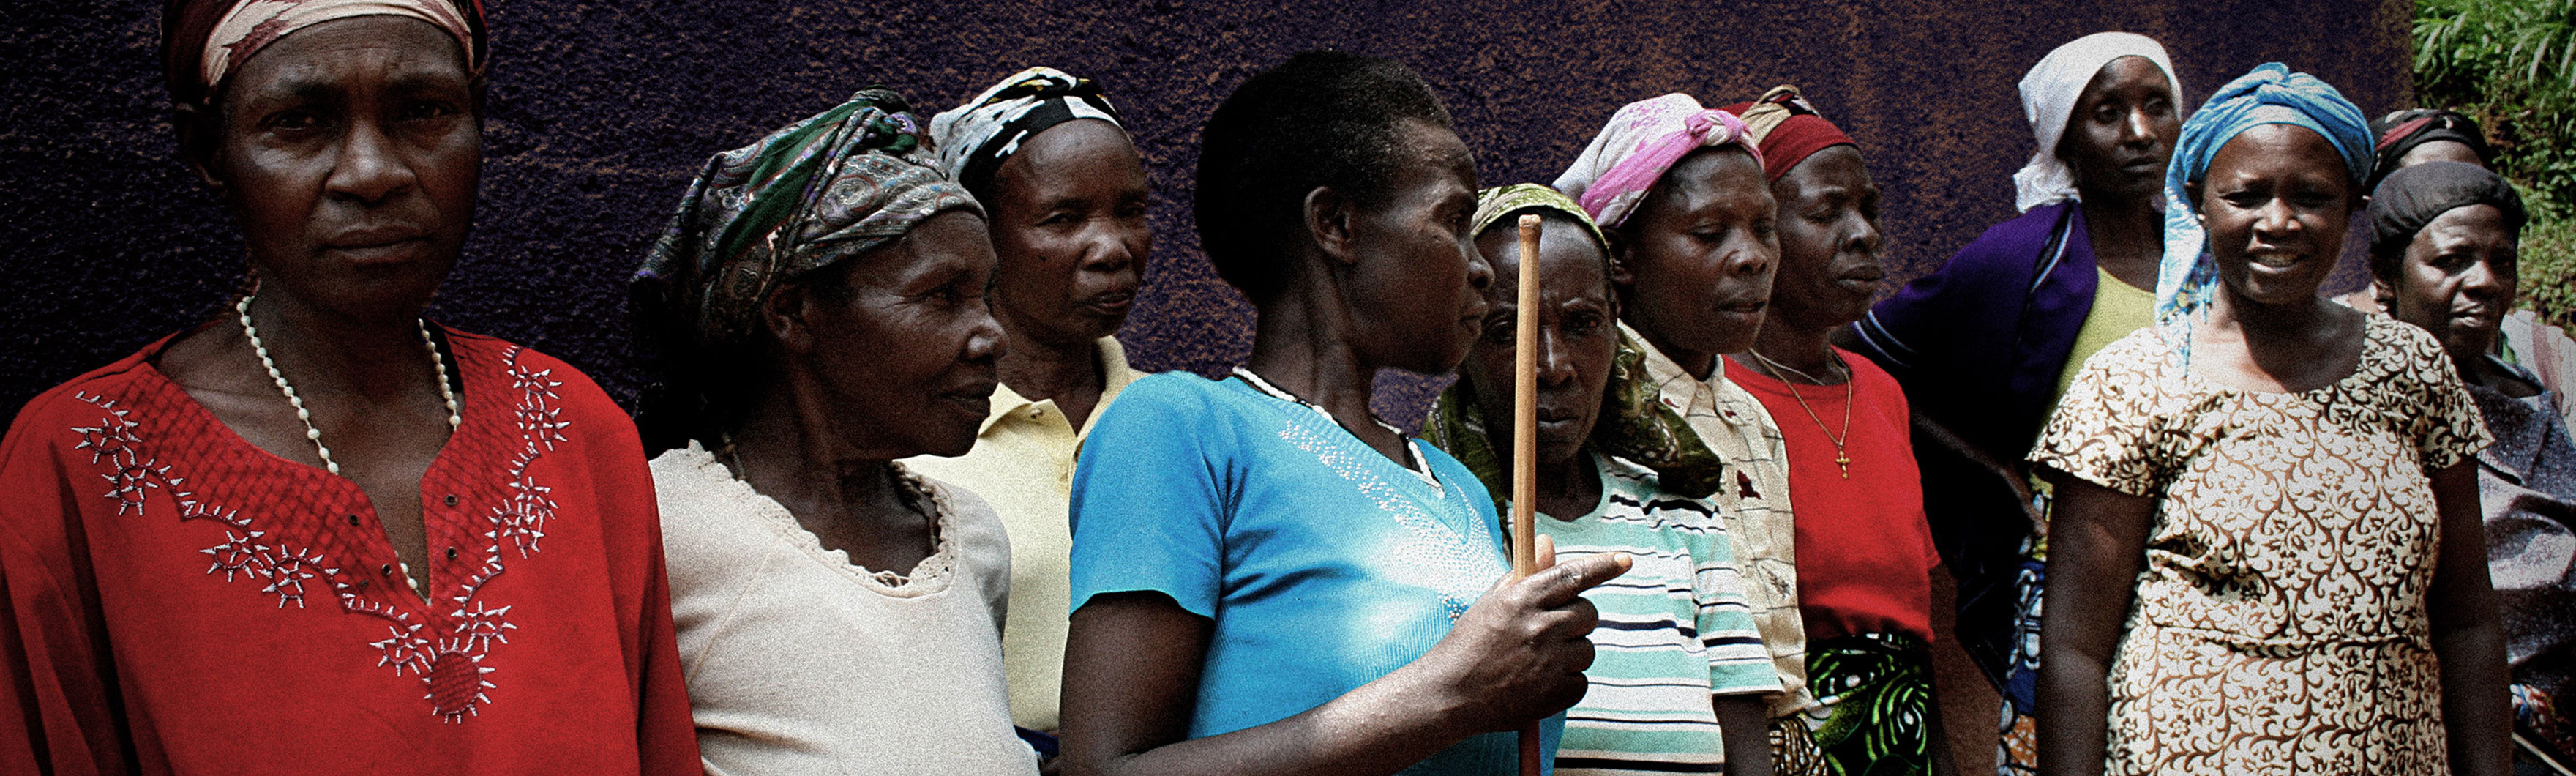 Rwanda, women group, widows due to the genocide. They receive psychological aid from HI.